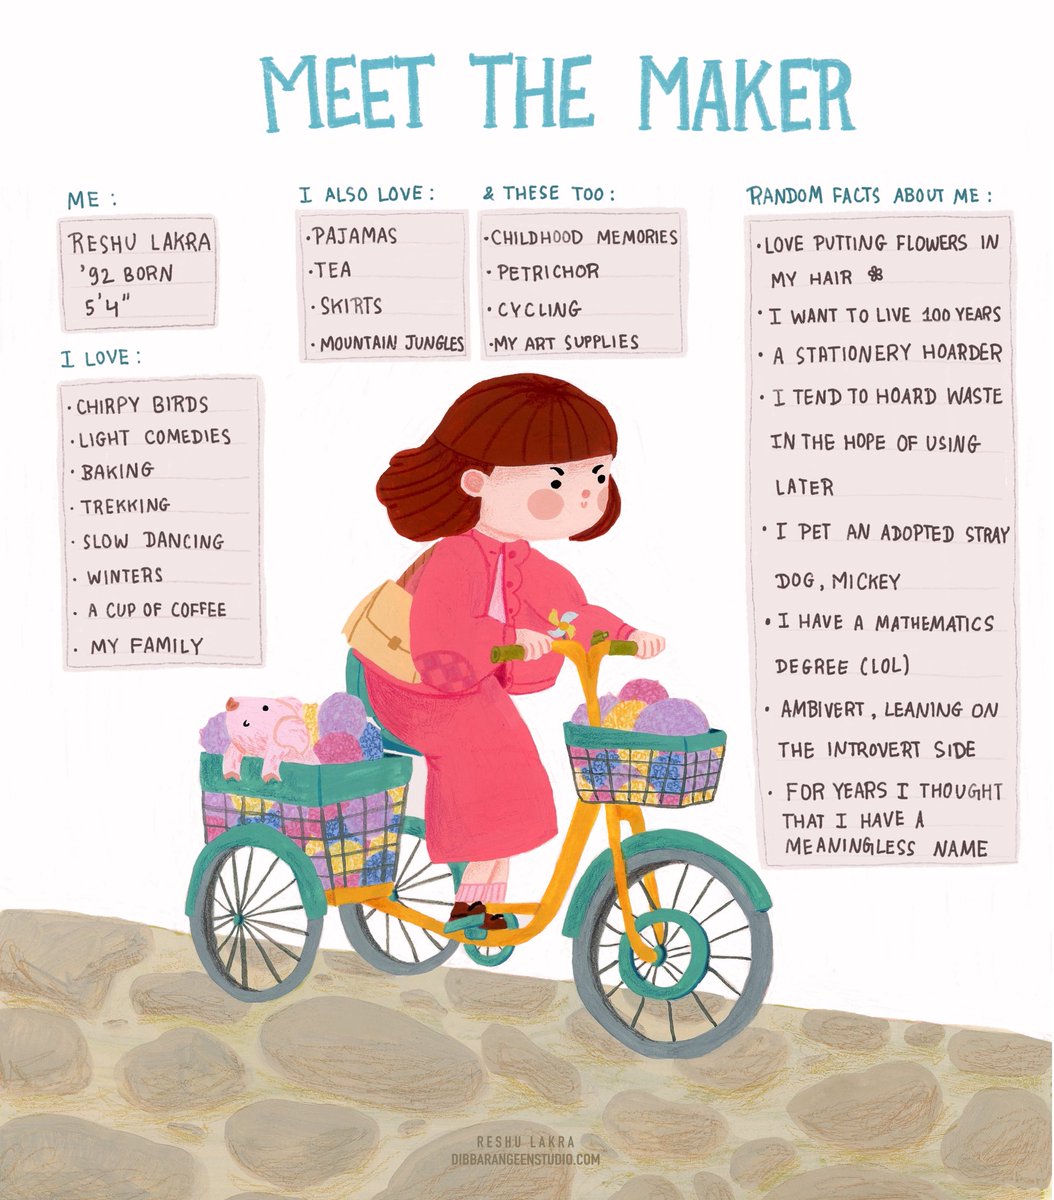 I thought I would it would be great to end March with a little 'get to know me'. Such a pleasure to have a wonderful community here!
#marchmeetthemaker #MeetTheArtist #childrensbookillustrator #kidlit